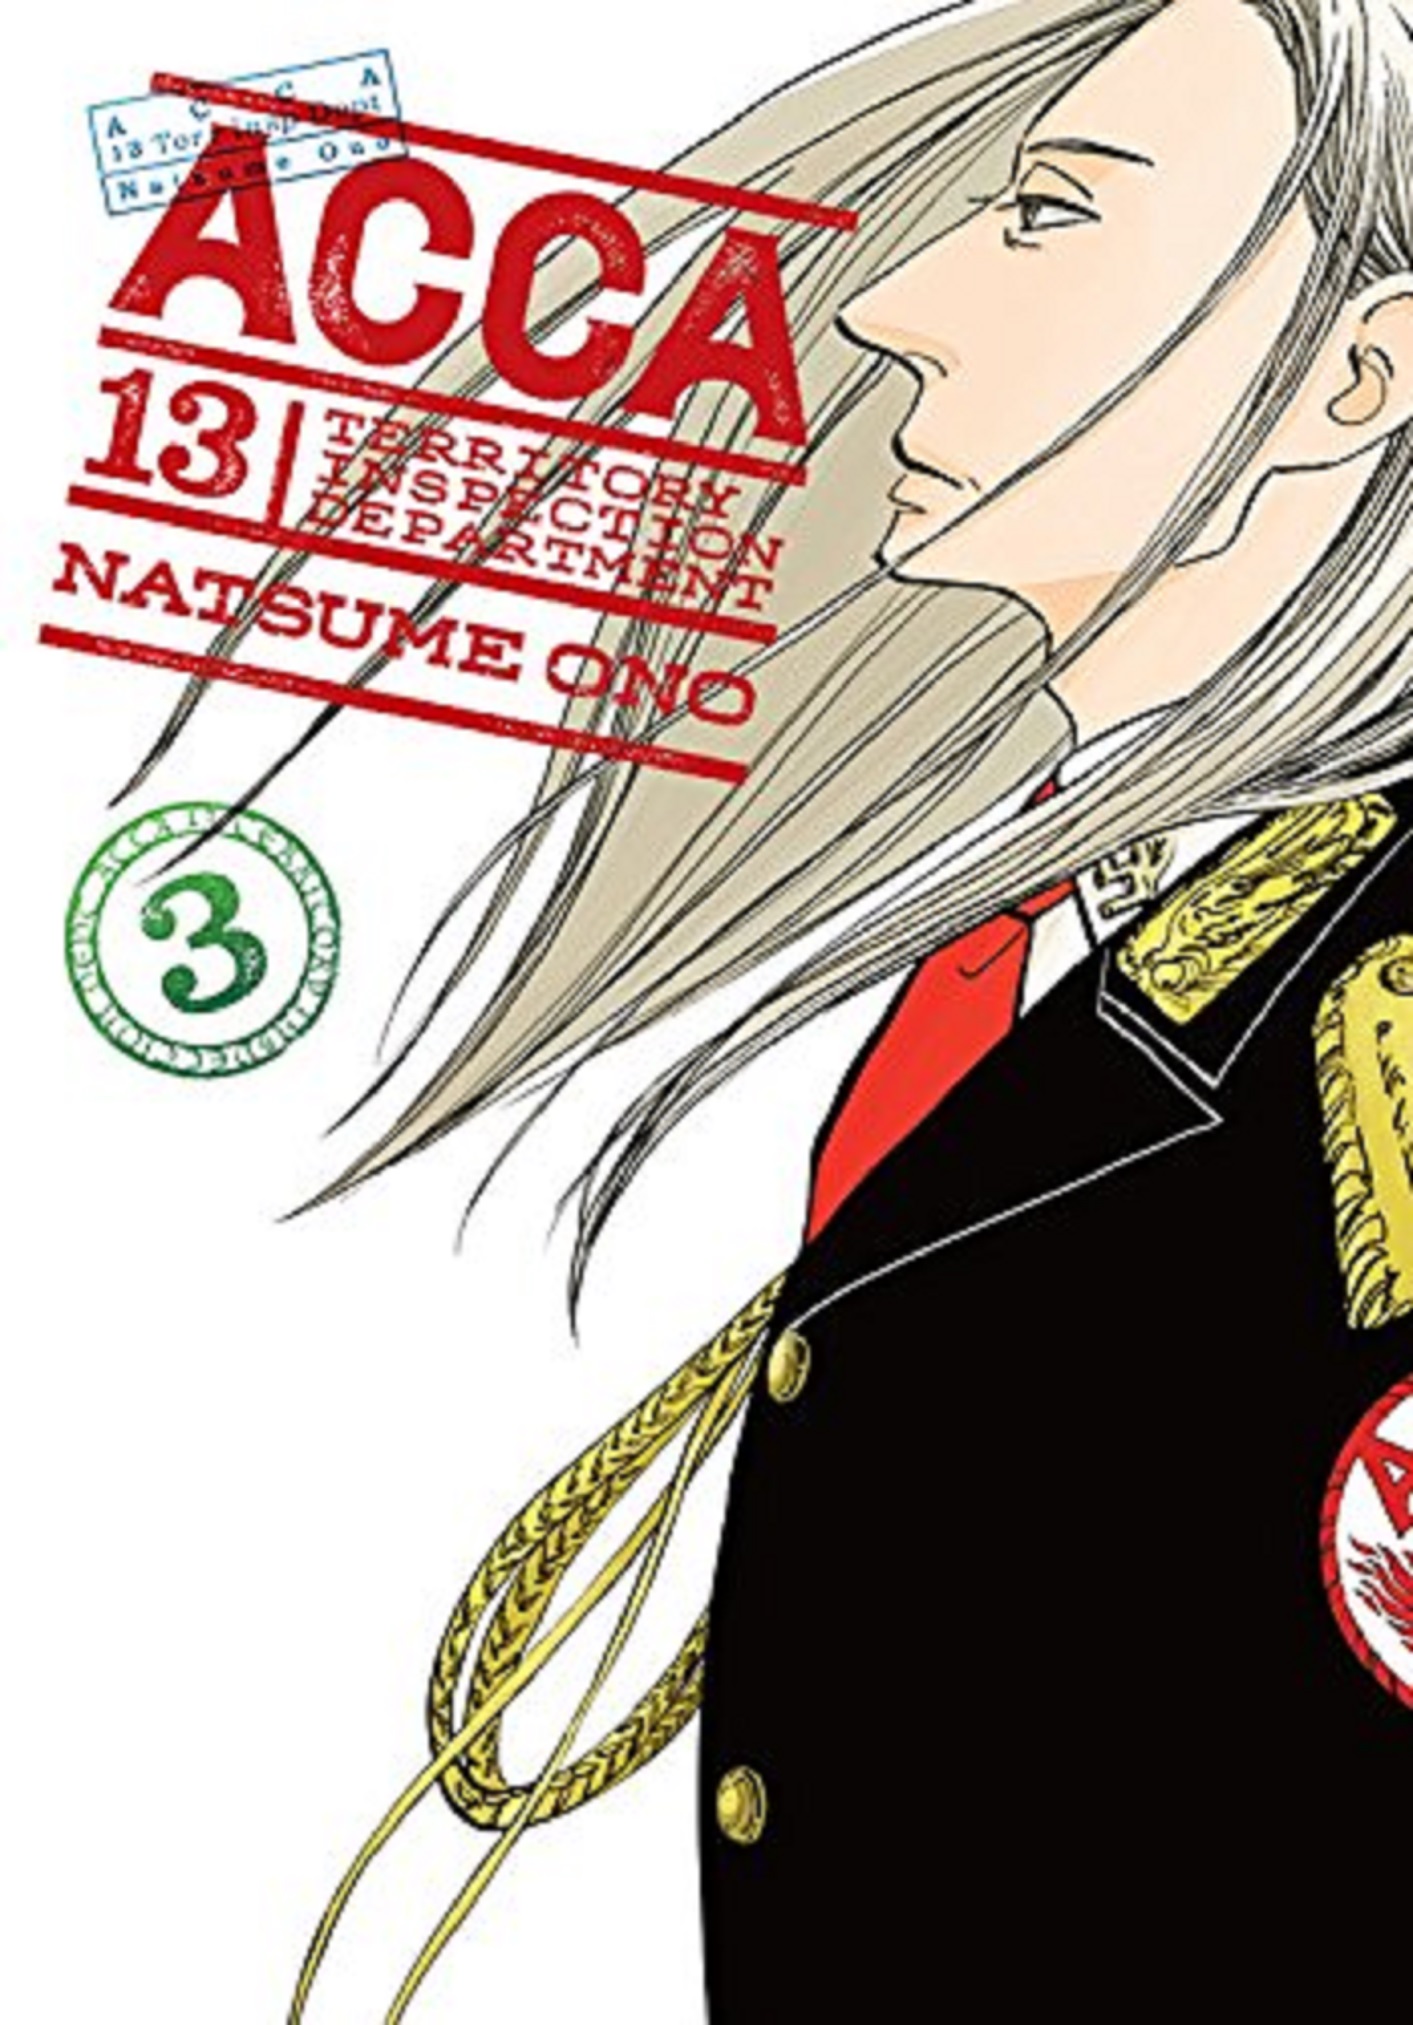 ACCA 13-Territory Inspection Department - Volume 3 | Natsume Ono